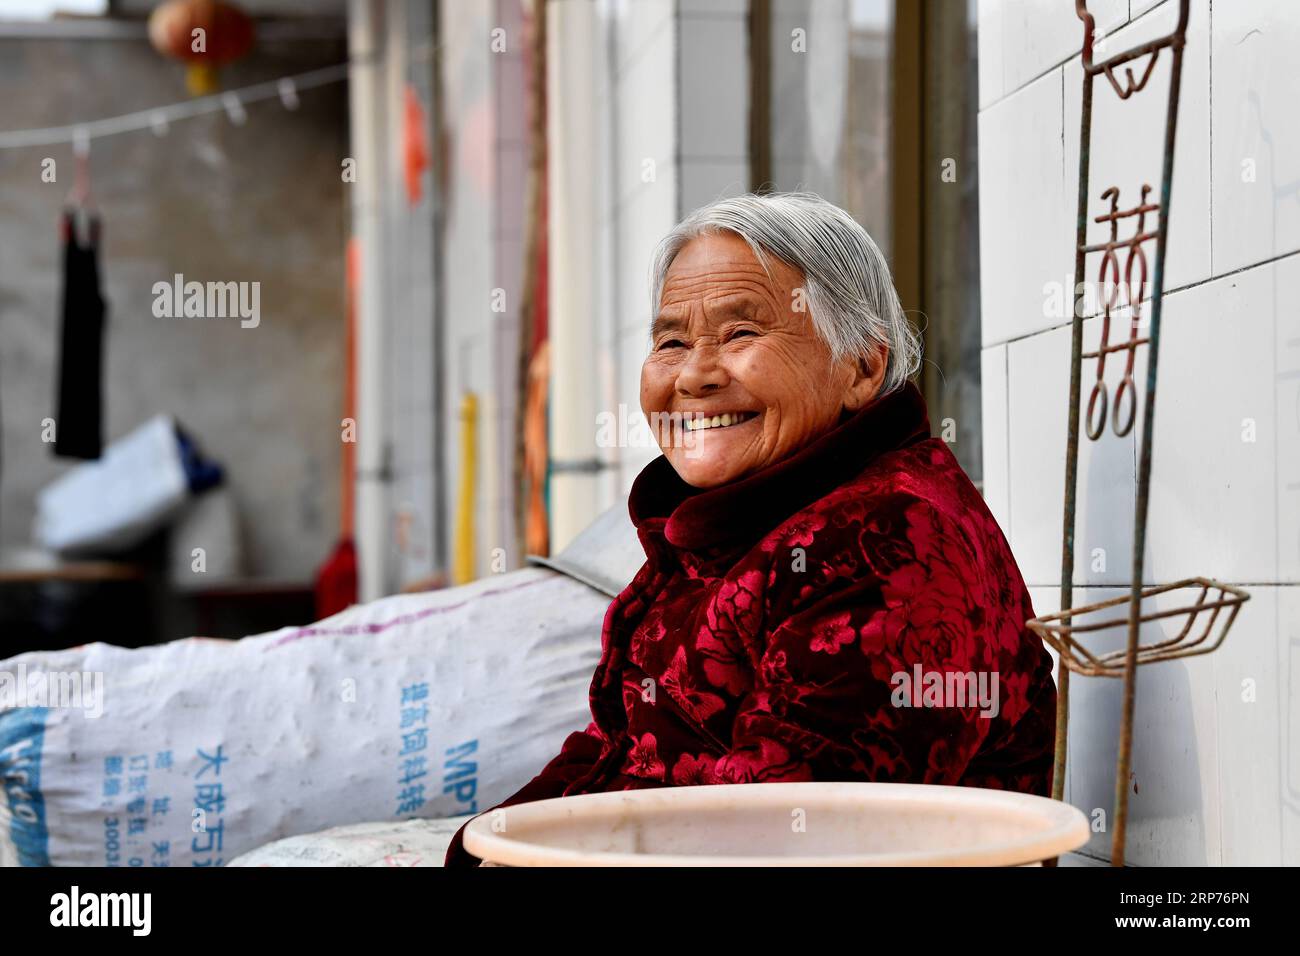 (190129) -- WENXI COUNTY, Jan. 29, 2019 (Xinhua) -- Zhai Xianying, a resident of the Home of Happiness poverty-alleviation settlement, takes a rest in Zhangcailing Village of Yangyu Township, Wenxi County, north China s Shanxi Province, Jan. 25, 2019. For generations, residents of Zhangcailing Village barely scraped a living as a result of geographical isolation, poor infrastructure and lack of supporting industries. To help pull villagers out of poverty, the government increased its financial support encouraging agriculture and husbandry suited to the local conditions. By planting Sichuan pep Stock Photo